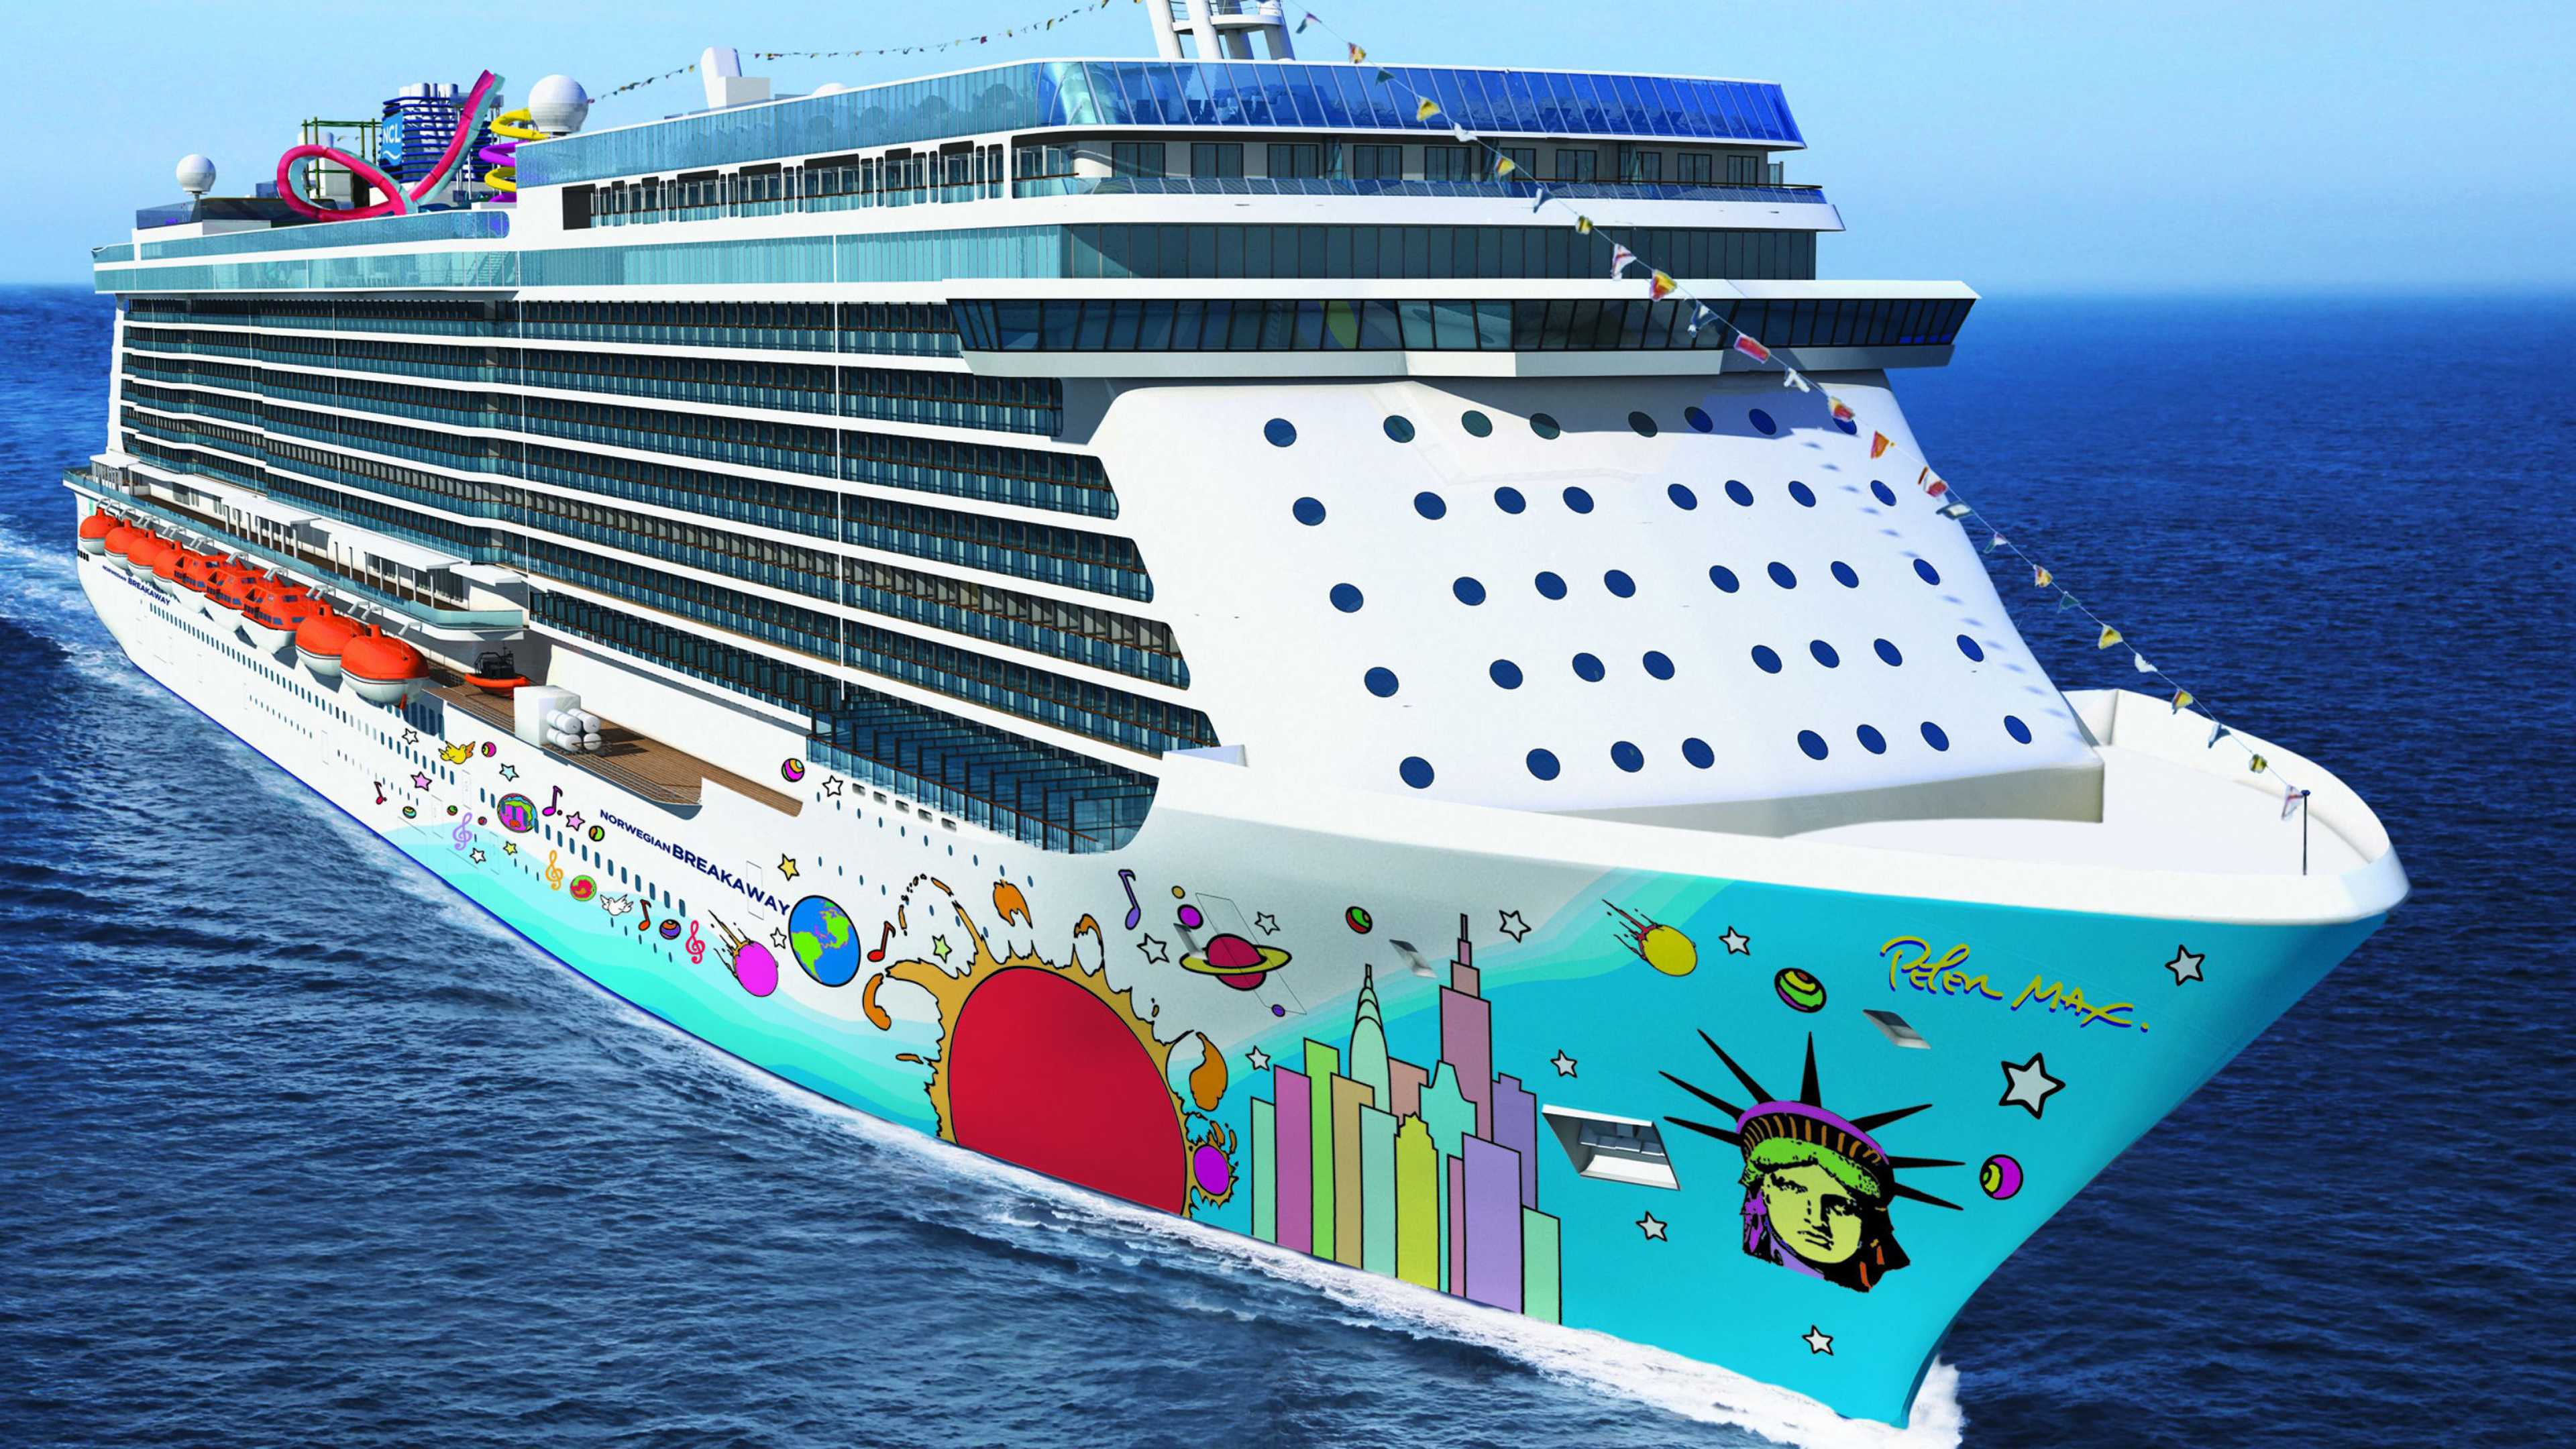 Cruise Ship With Colorful Paintings On Blue Sea K HD Cruise Ship